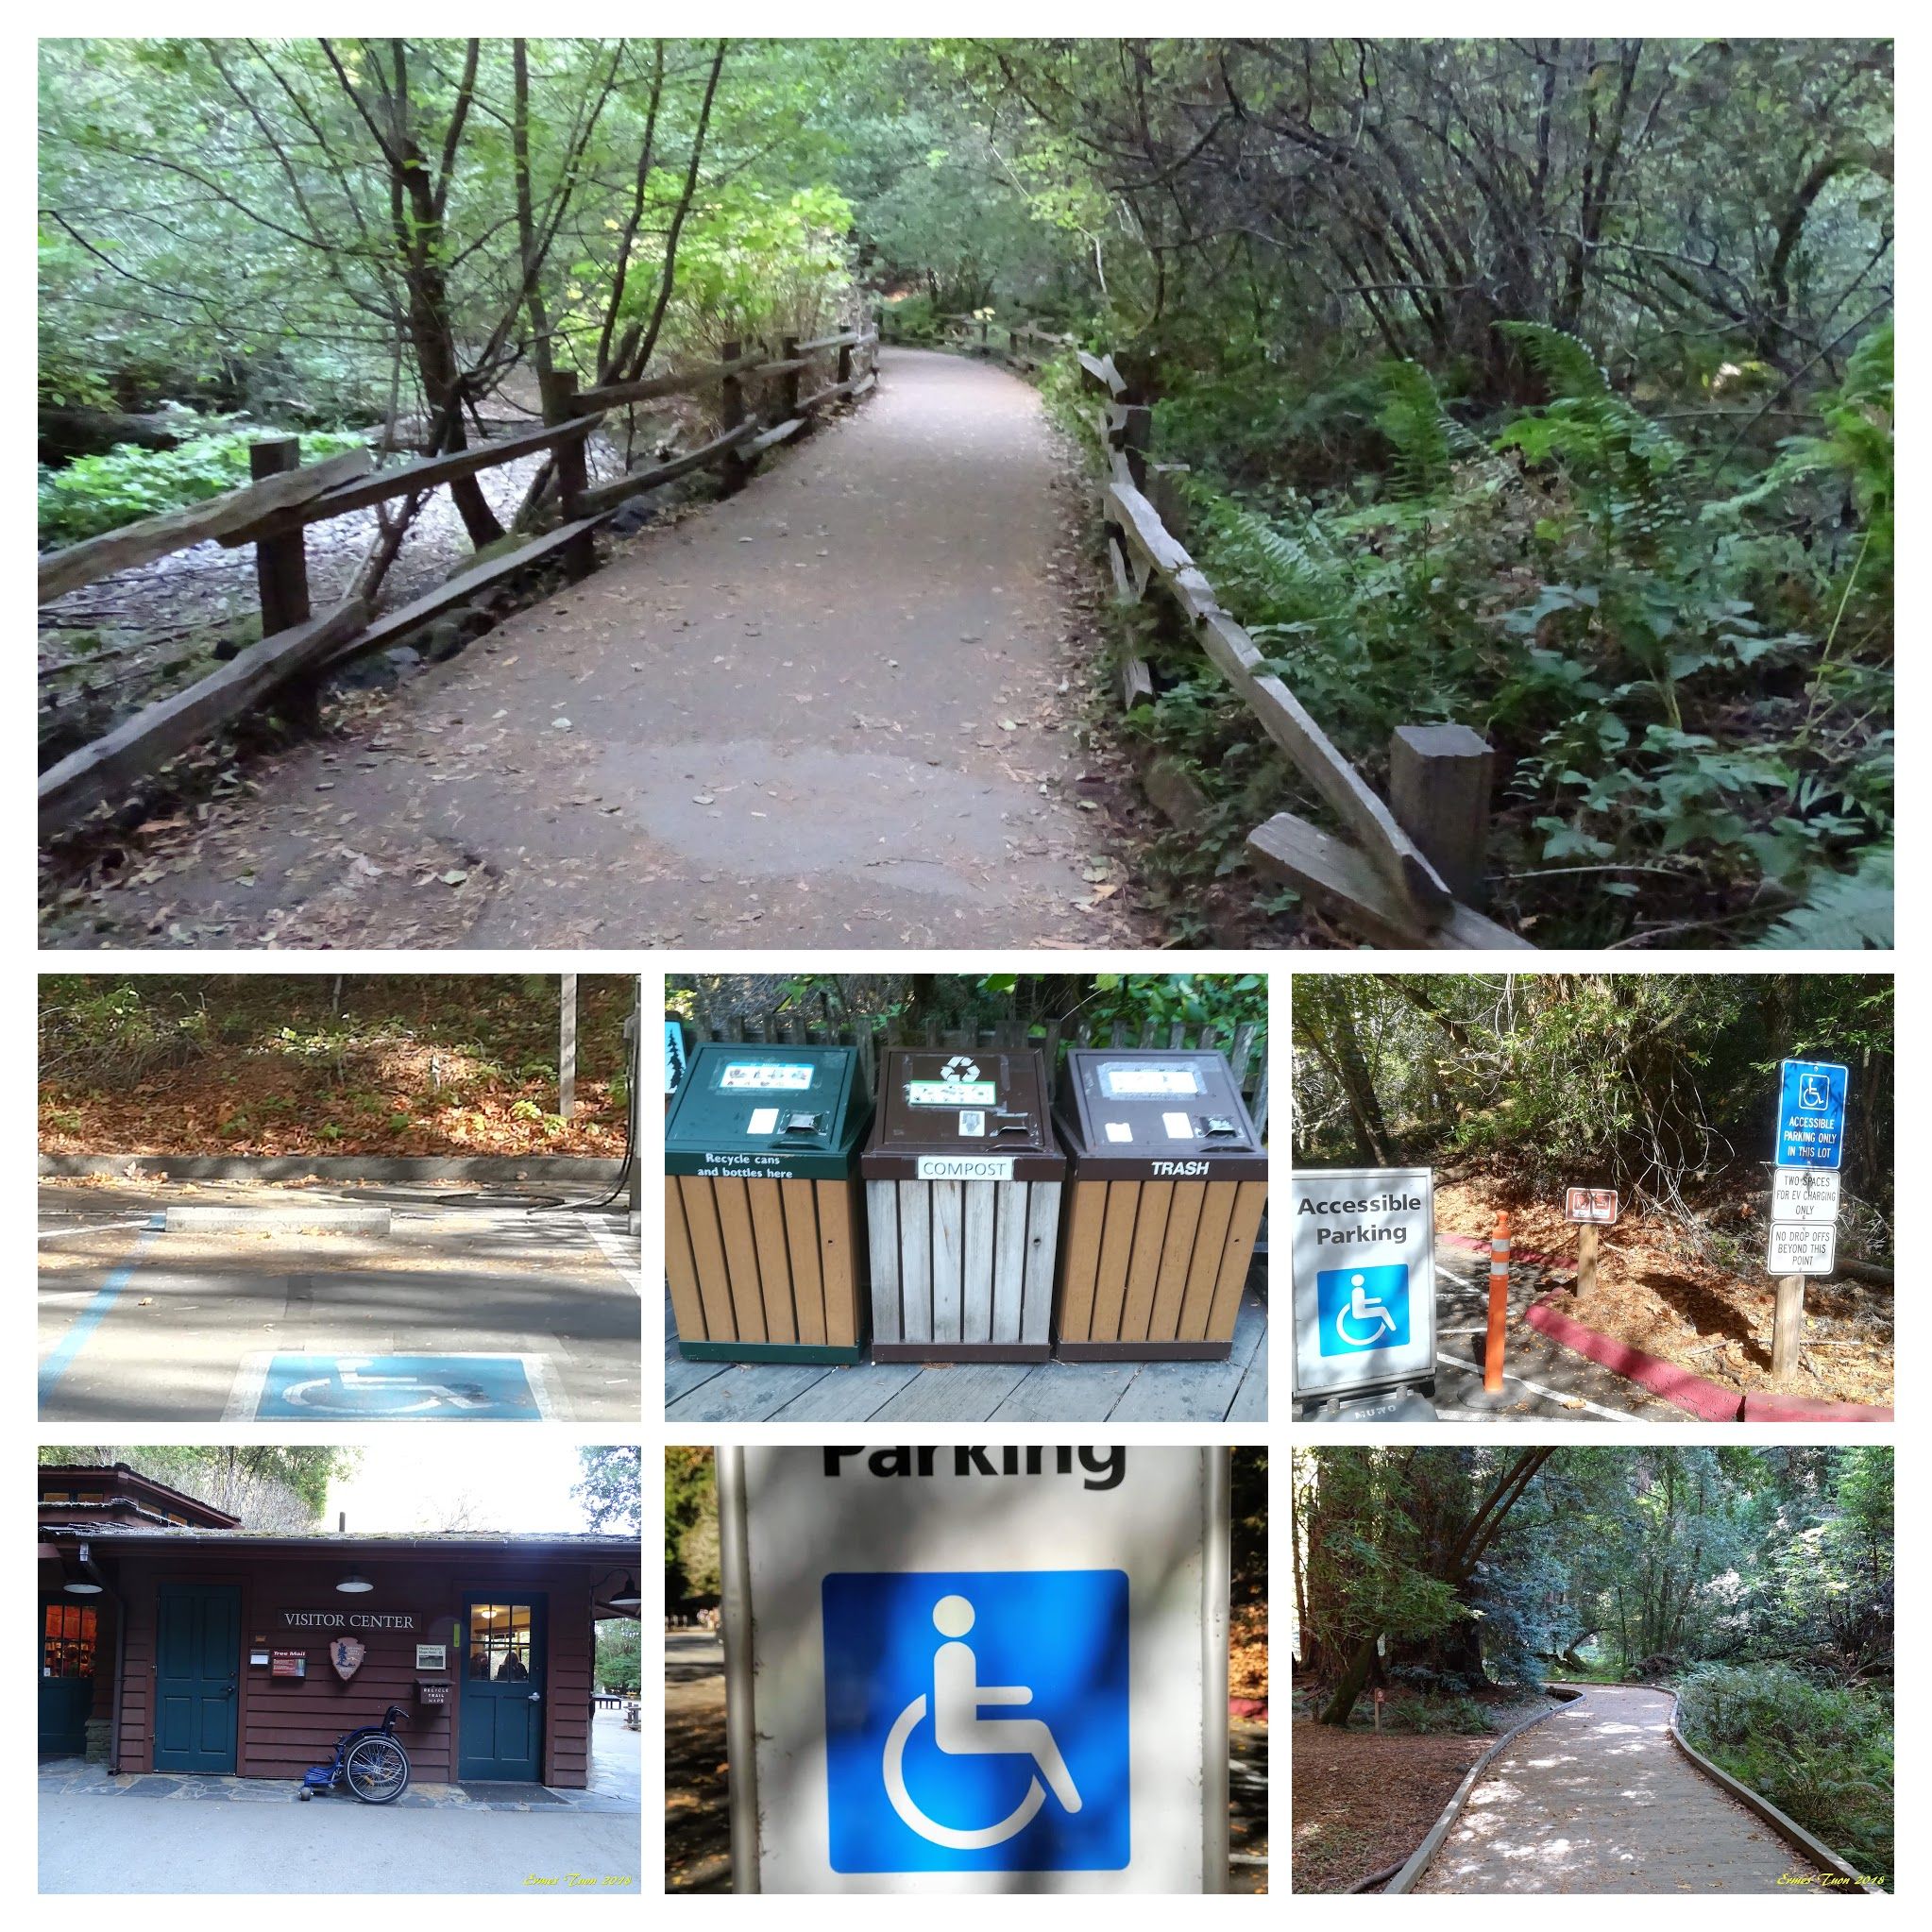 Caption: Accessibility at Muir Wood National Park - California - Photos by Local Guide @ermest